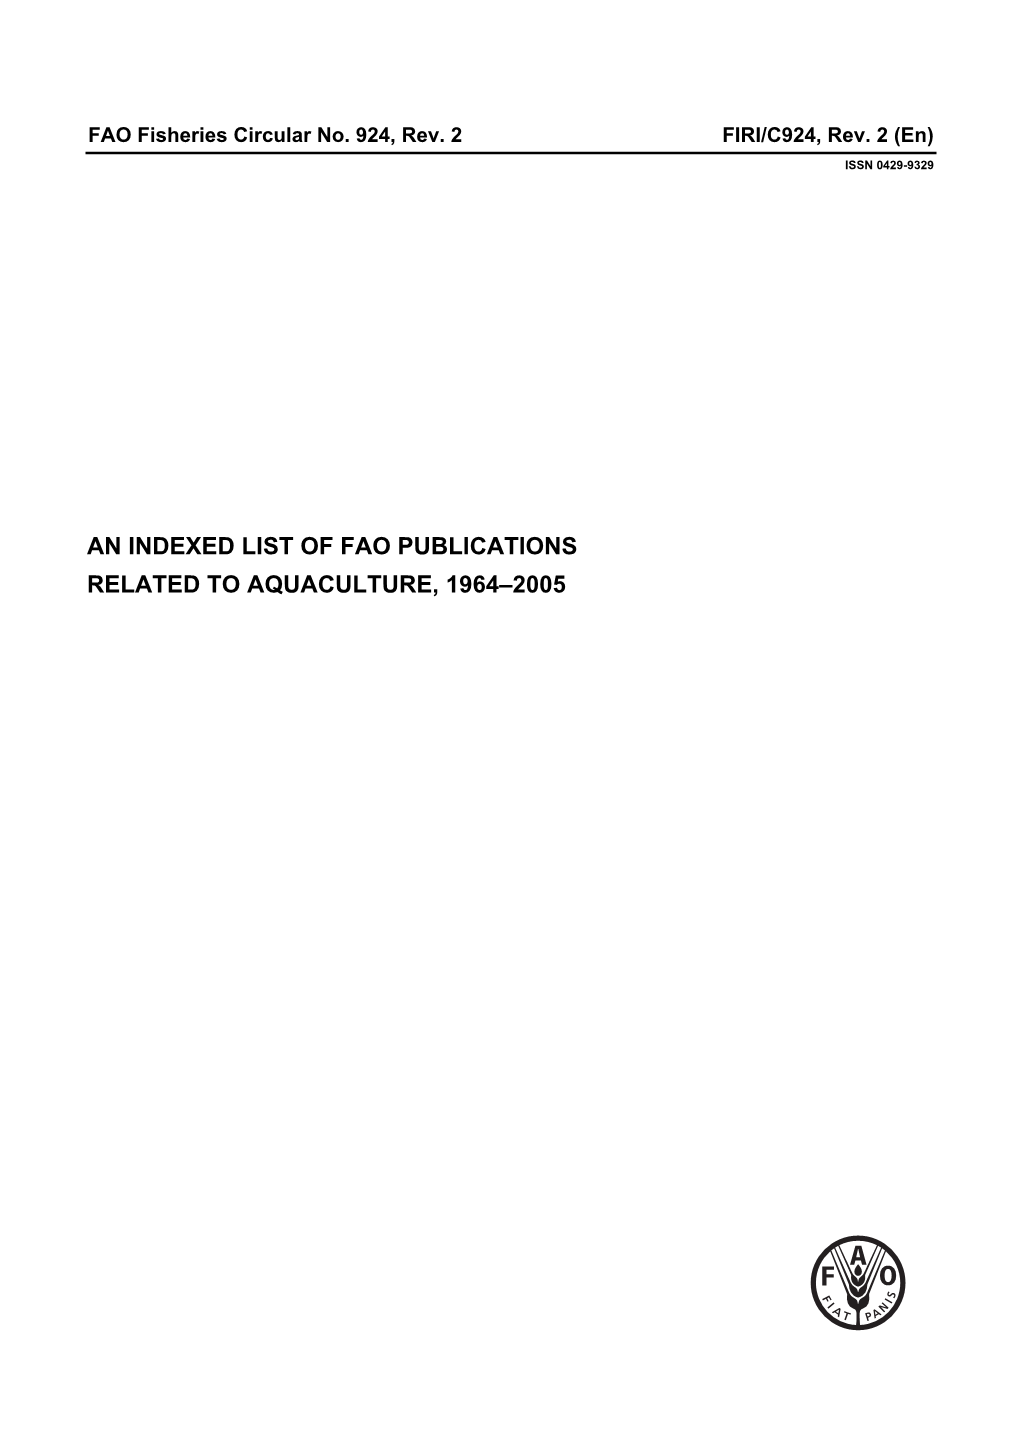 An Indexed List of Fao Publications Related to Aquaculture, 1964–2005